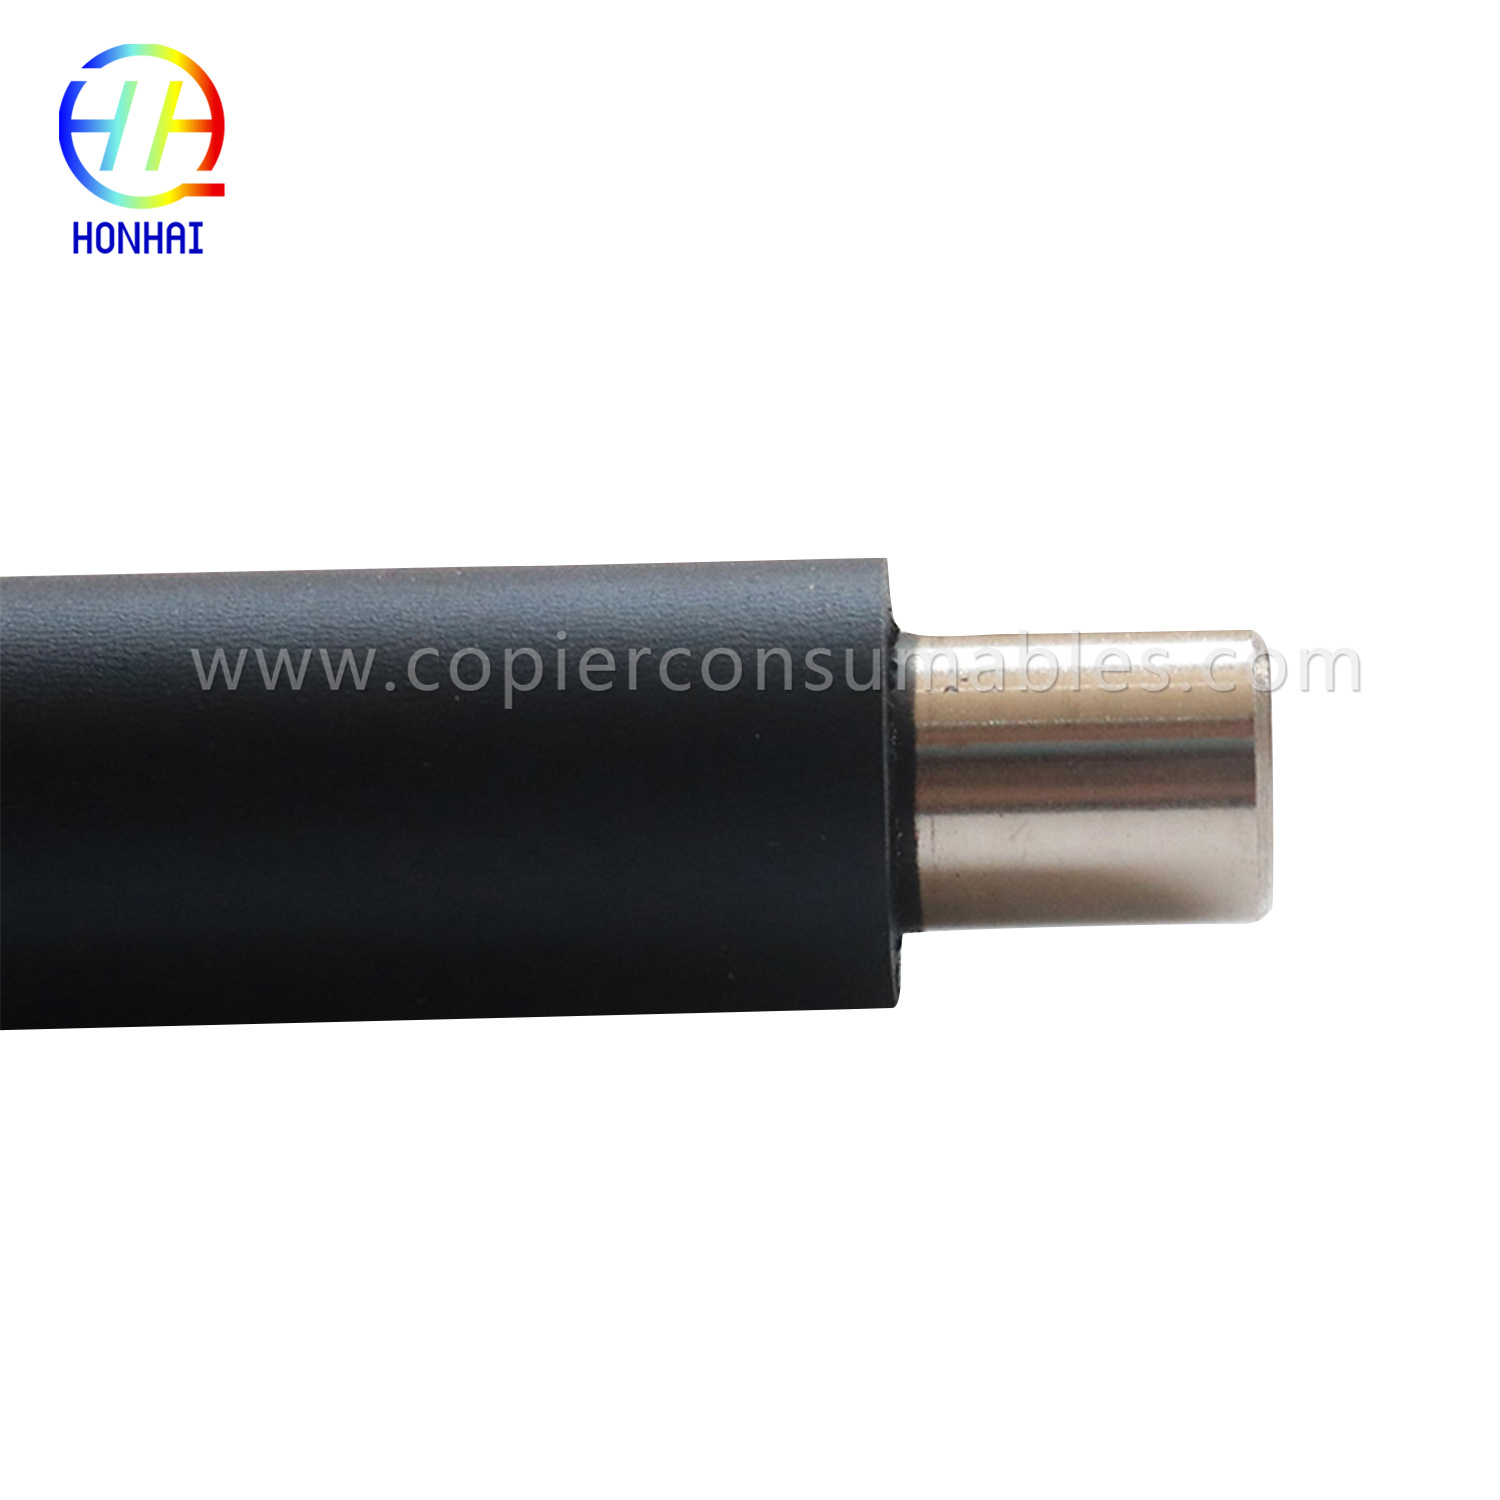 Primary Charge Roller for Xerox WorkCentre 7120 7125 7220 7225 (013R00657 013R00658 013R00659 013R00660) (2) 拷贝